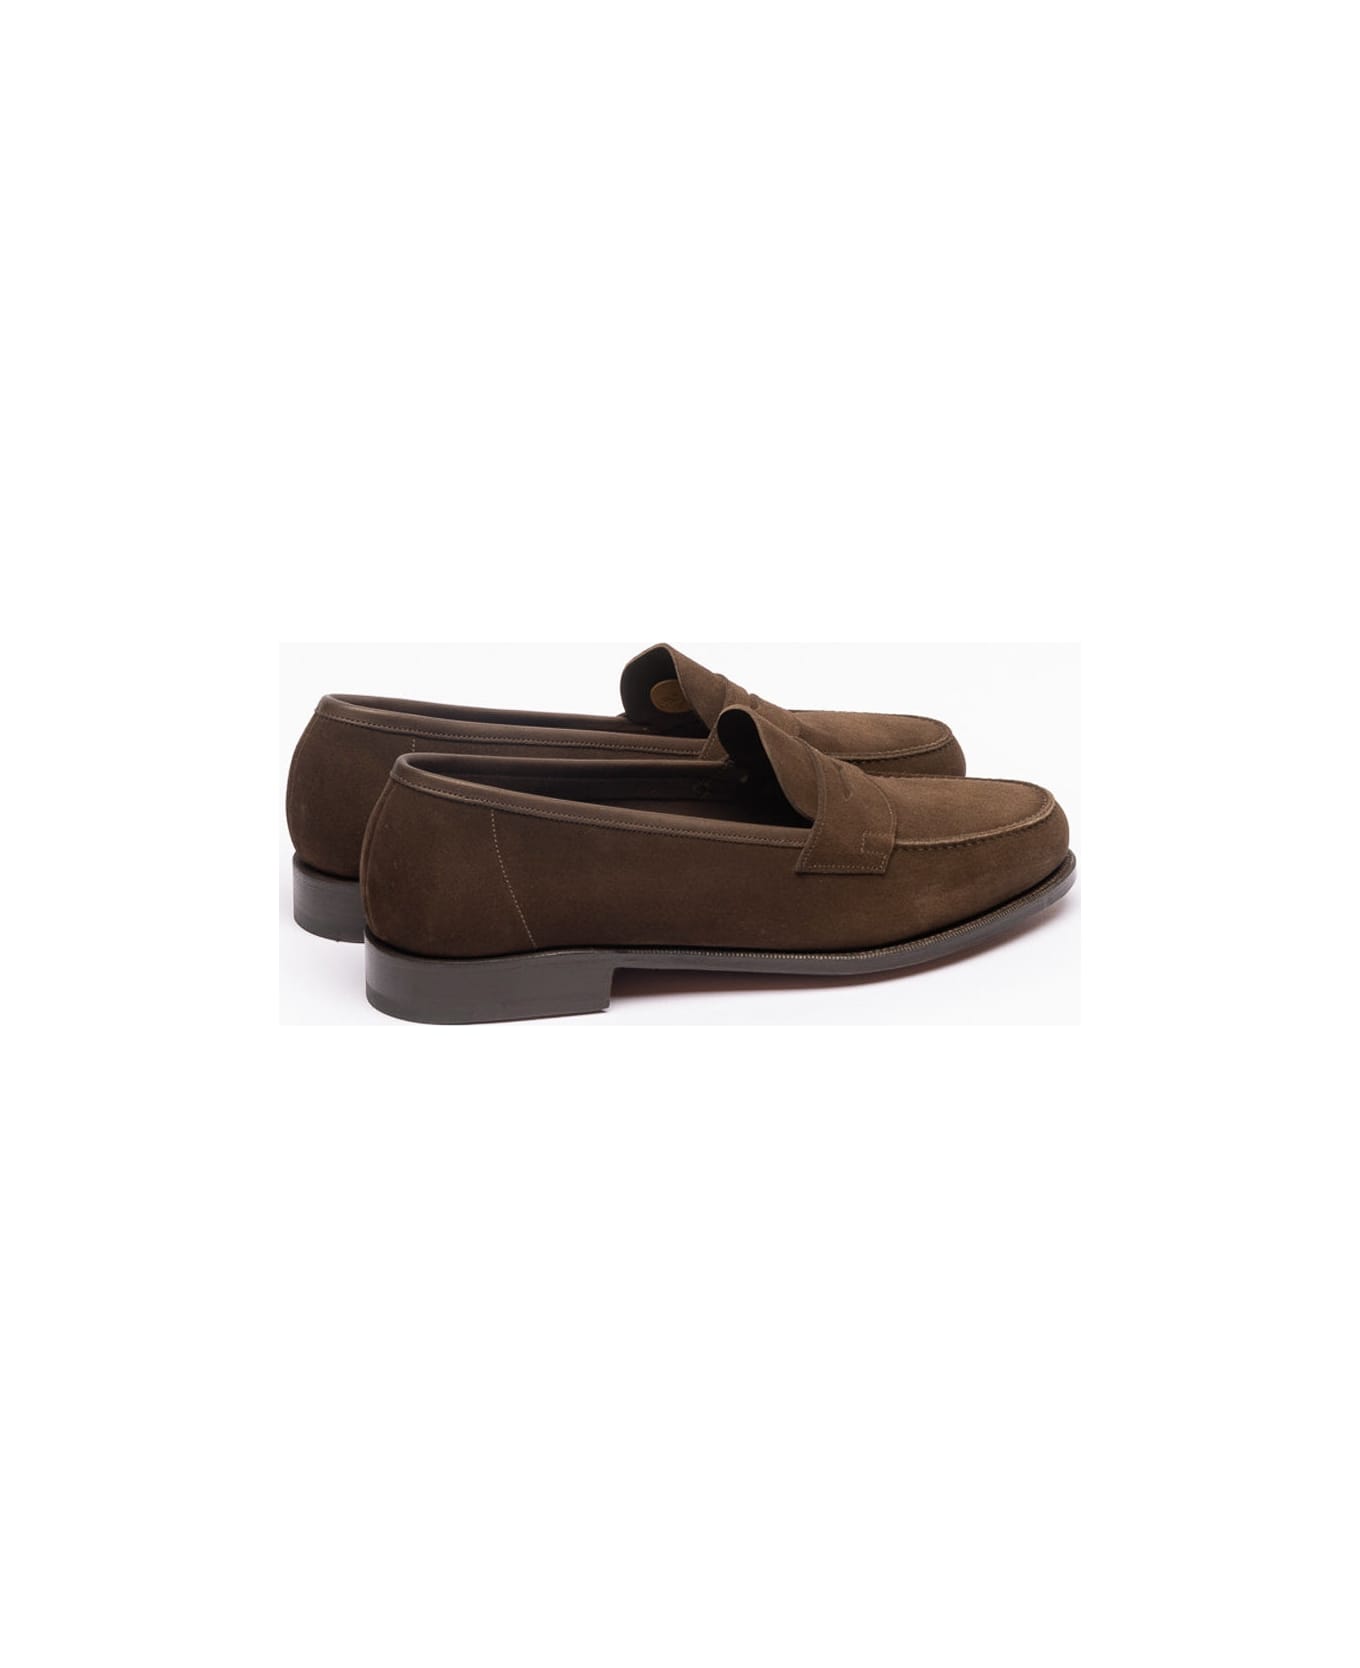 Edward Green Mocca Suede Penny Loafer - Marrone